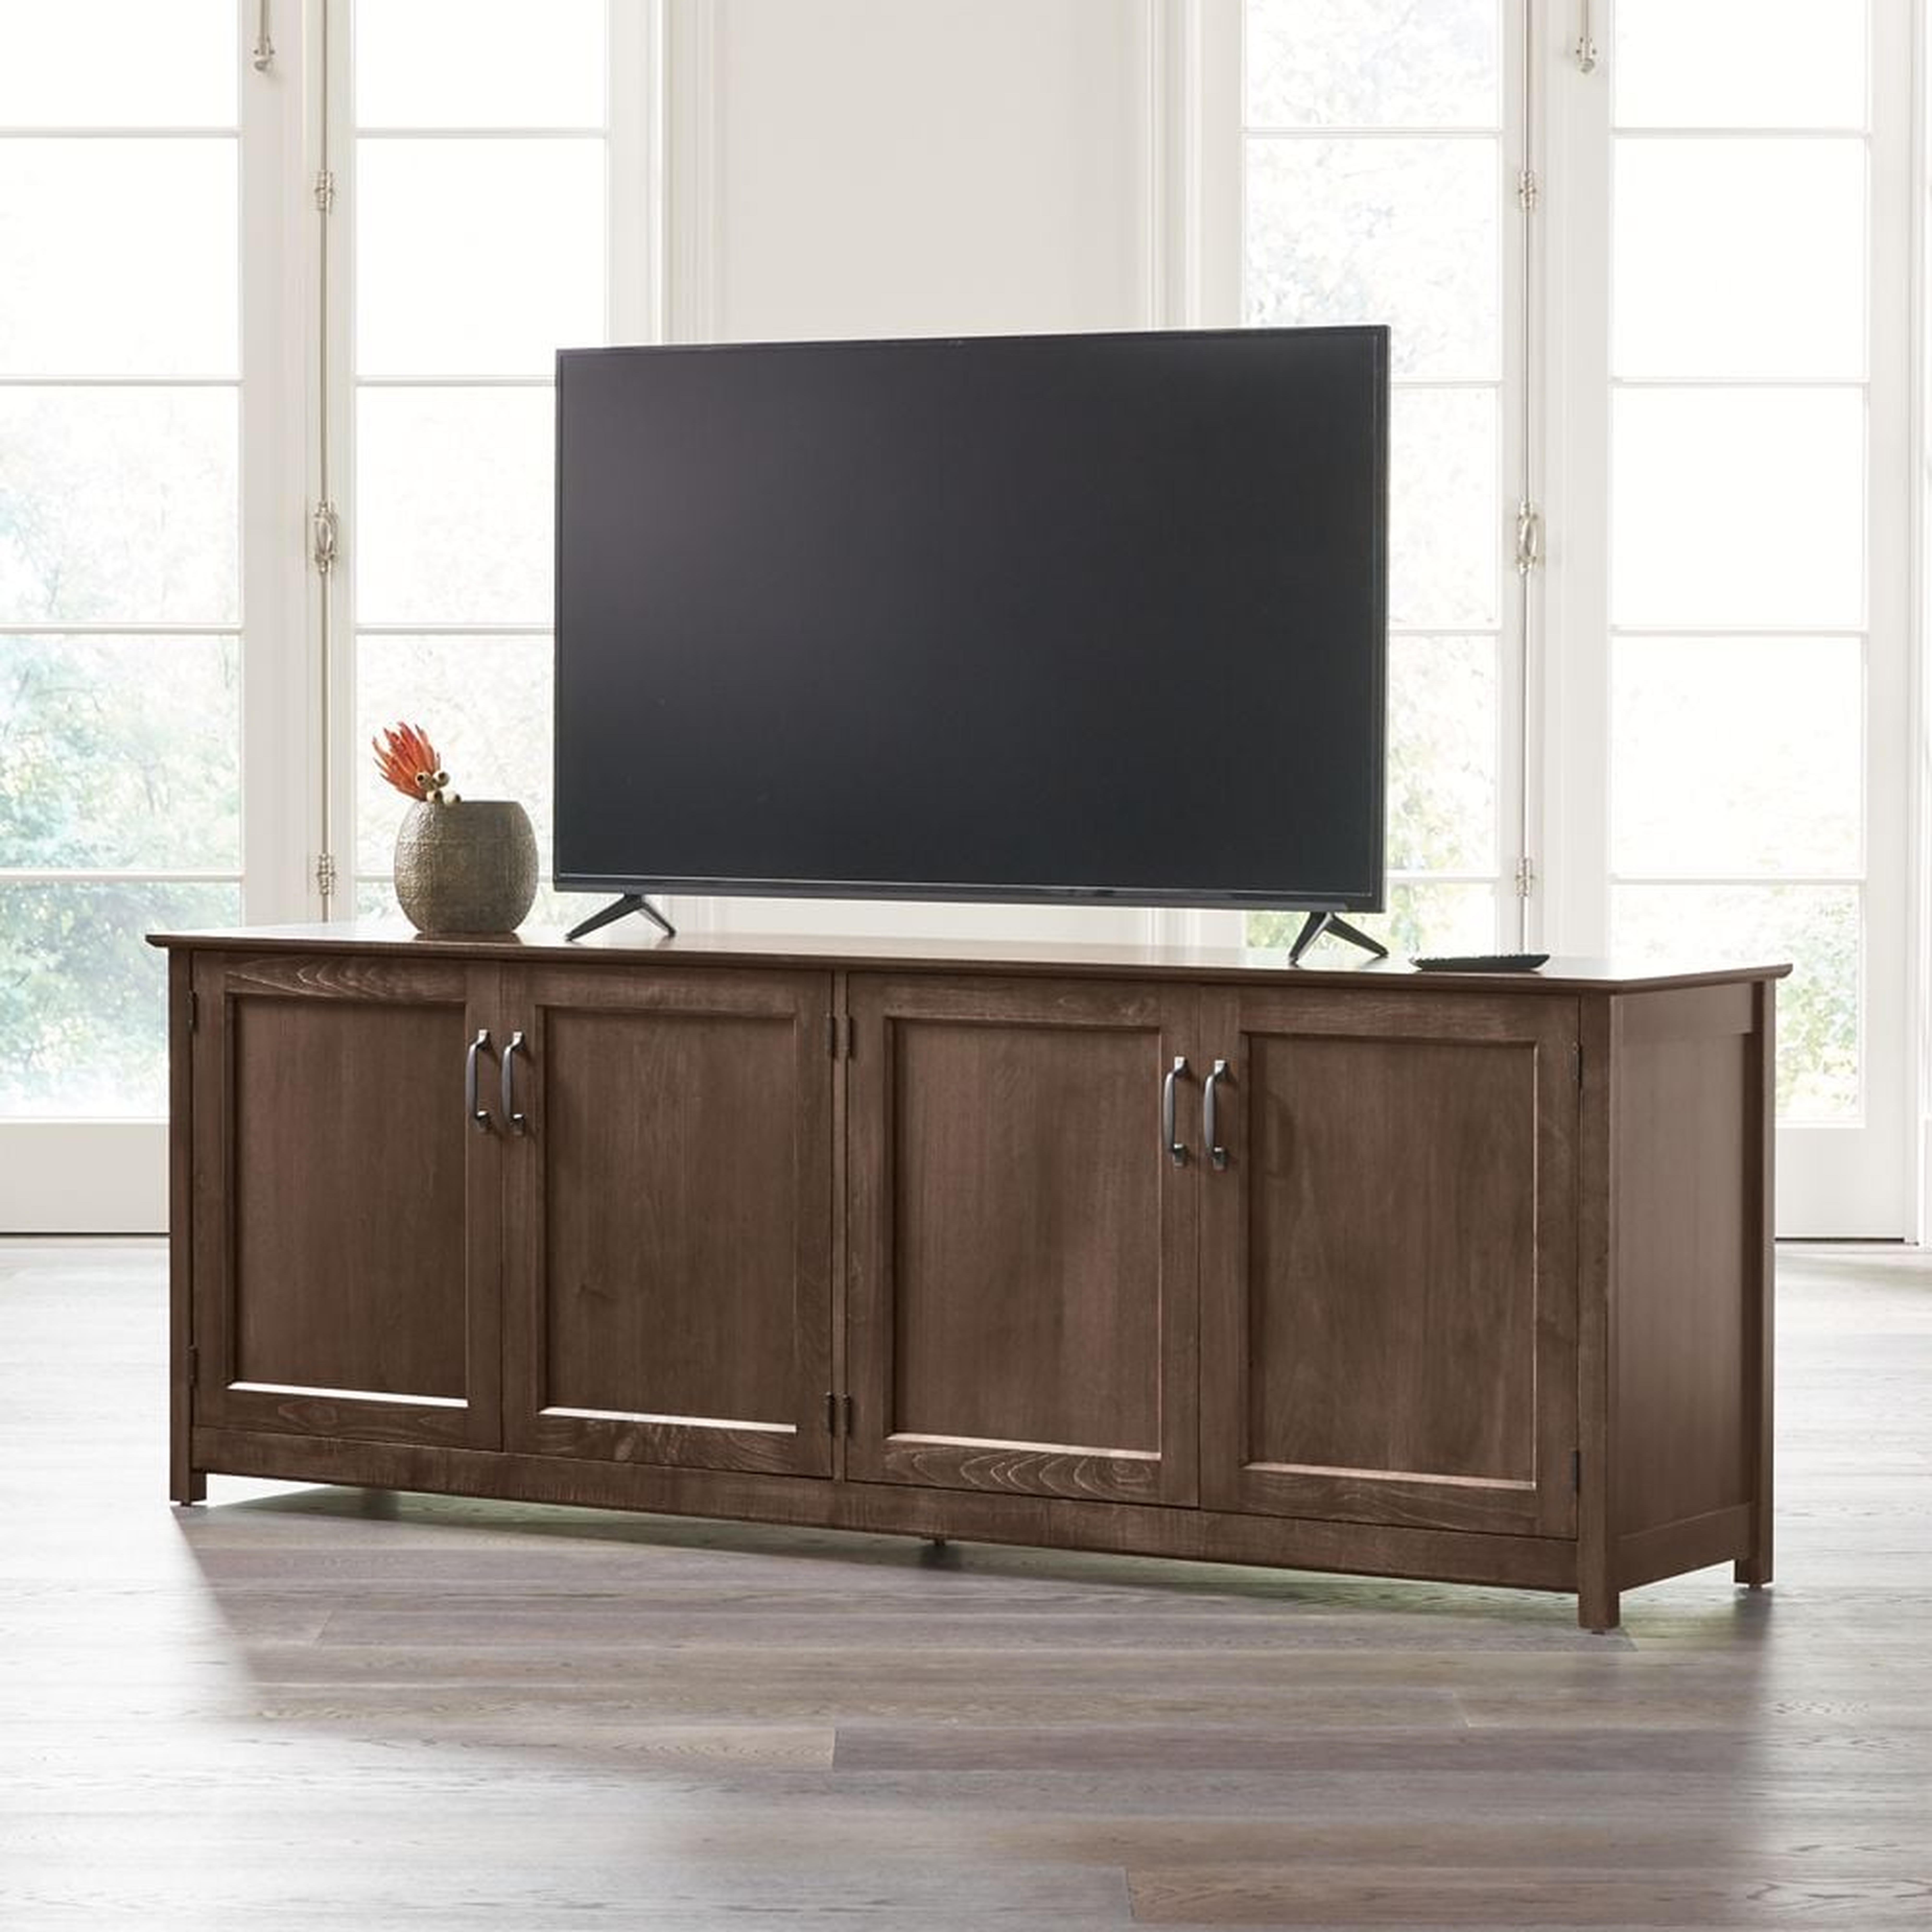 Ainsworth Cocoa 85" Media Console with Glass/Wood Doors - Crate and Barrel